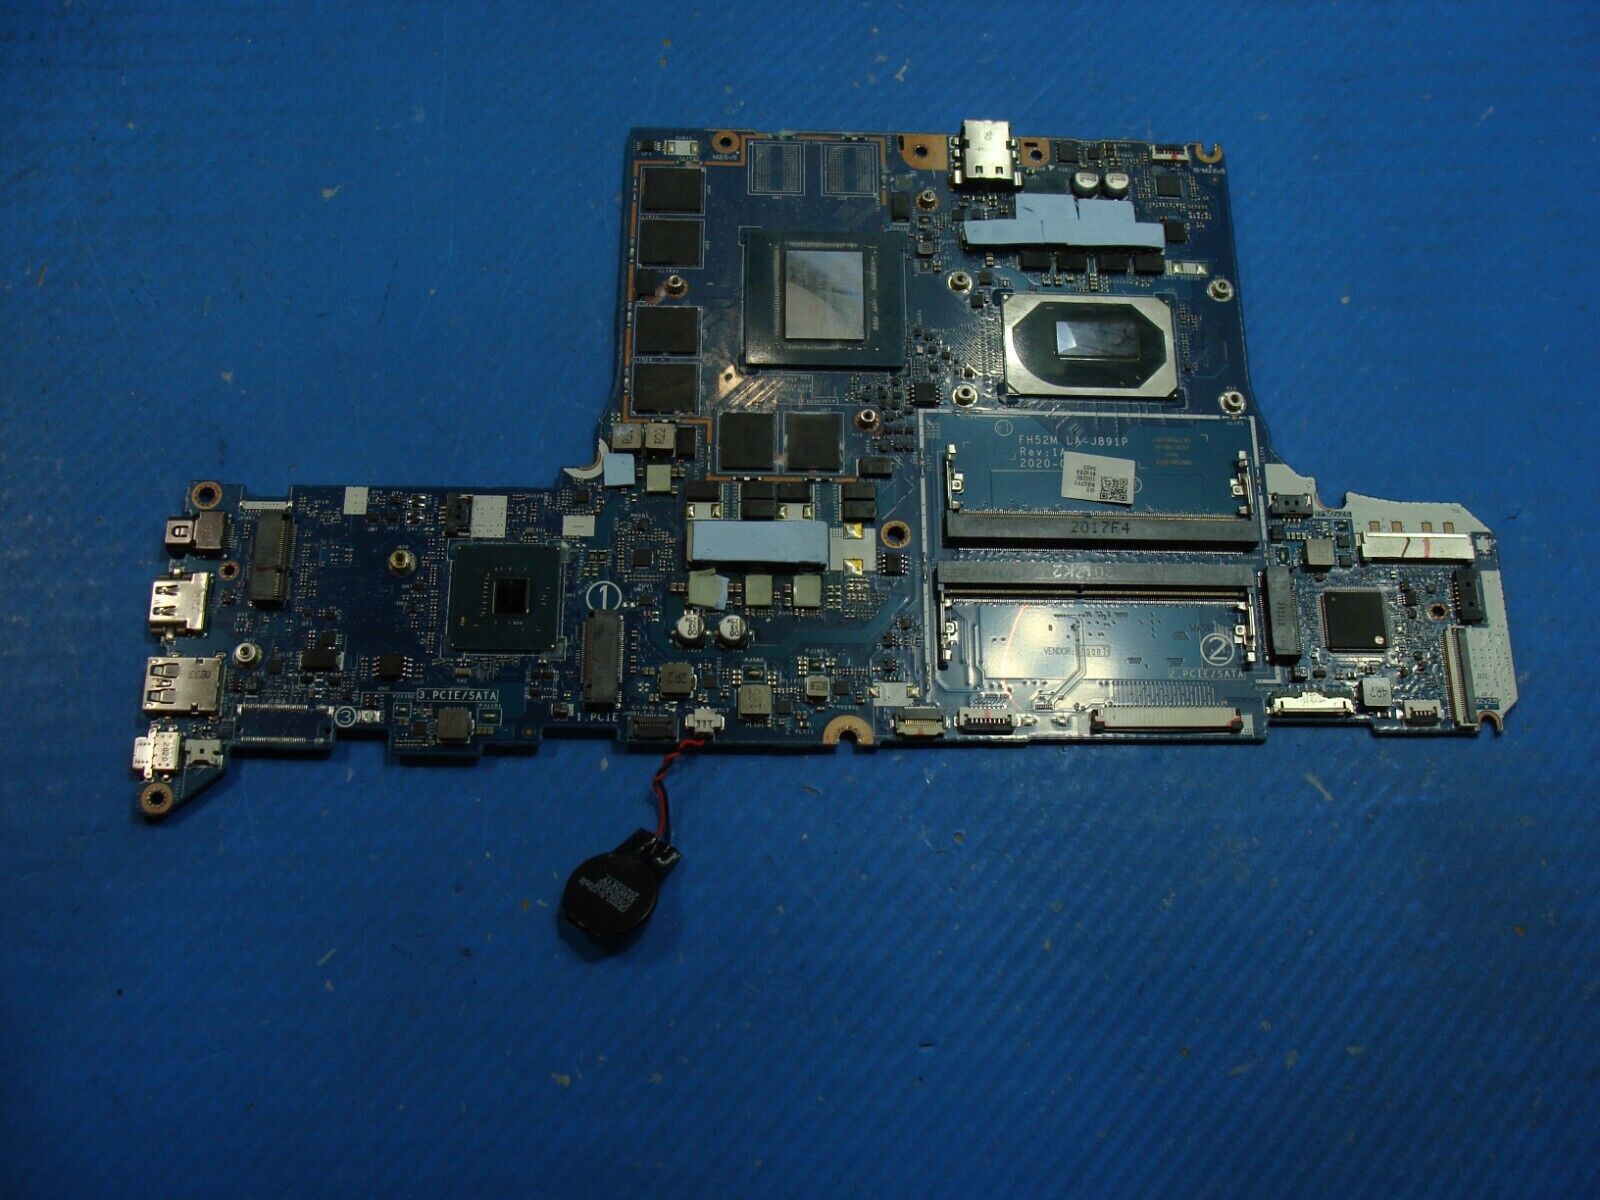 Acer PH315-53-781R i7-10750H 2.6GHz RTX2060 6GB Motherboard NBQ7Y11002 AS IS